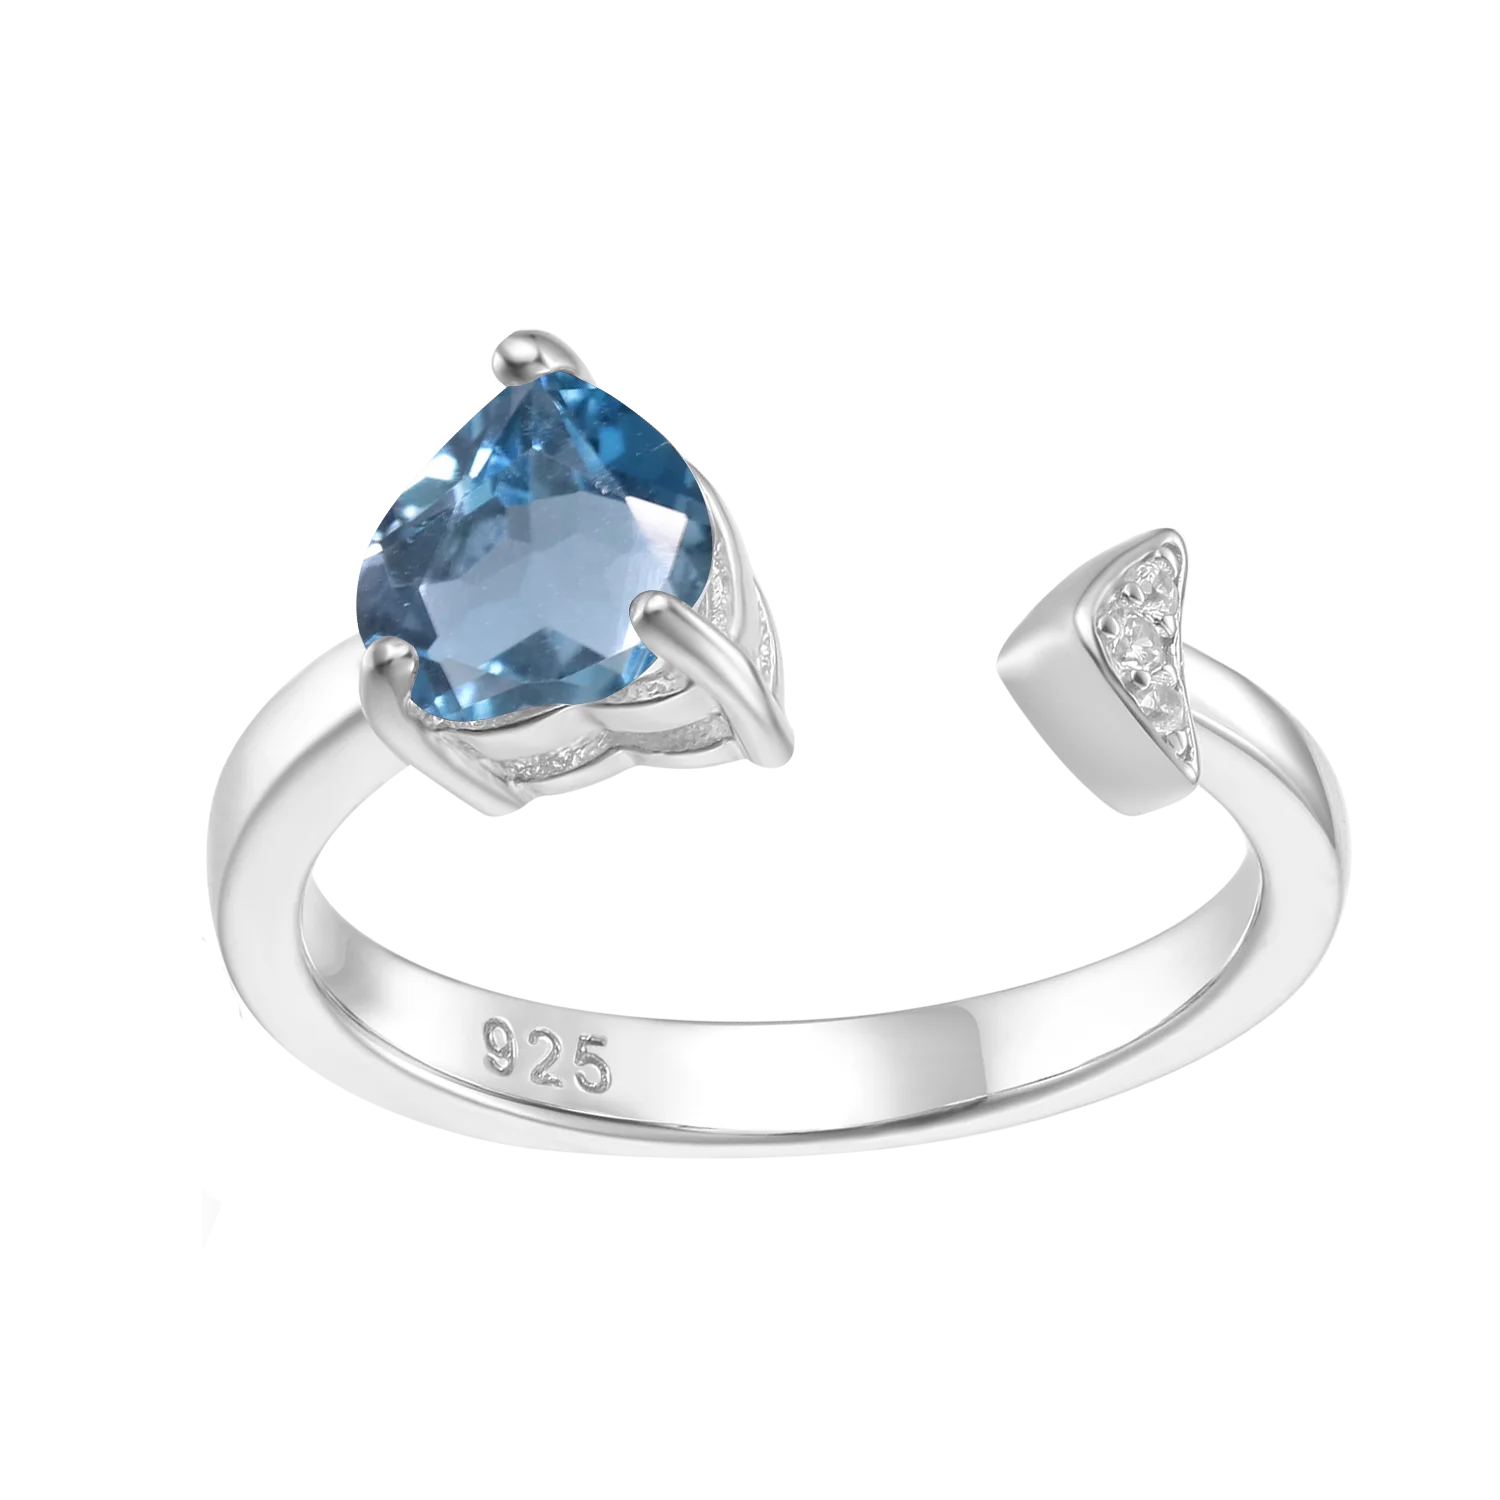 

Abiding Heart Shaped Ring 925 Sterling Silver Jewelry Natural London Blue Topaz Stone Open Engagement Ring Women For Bridal